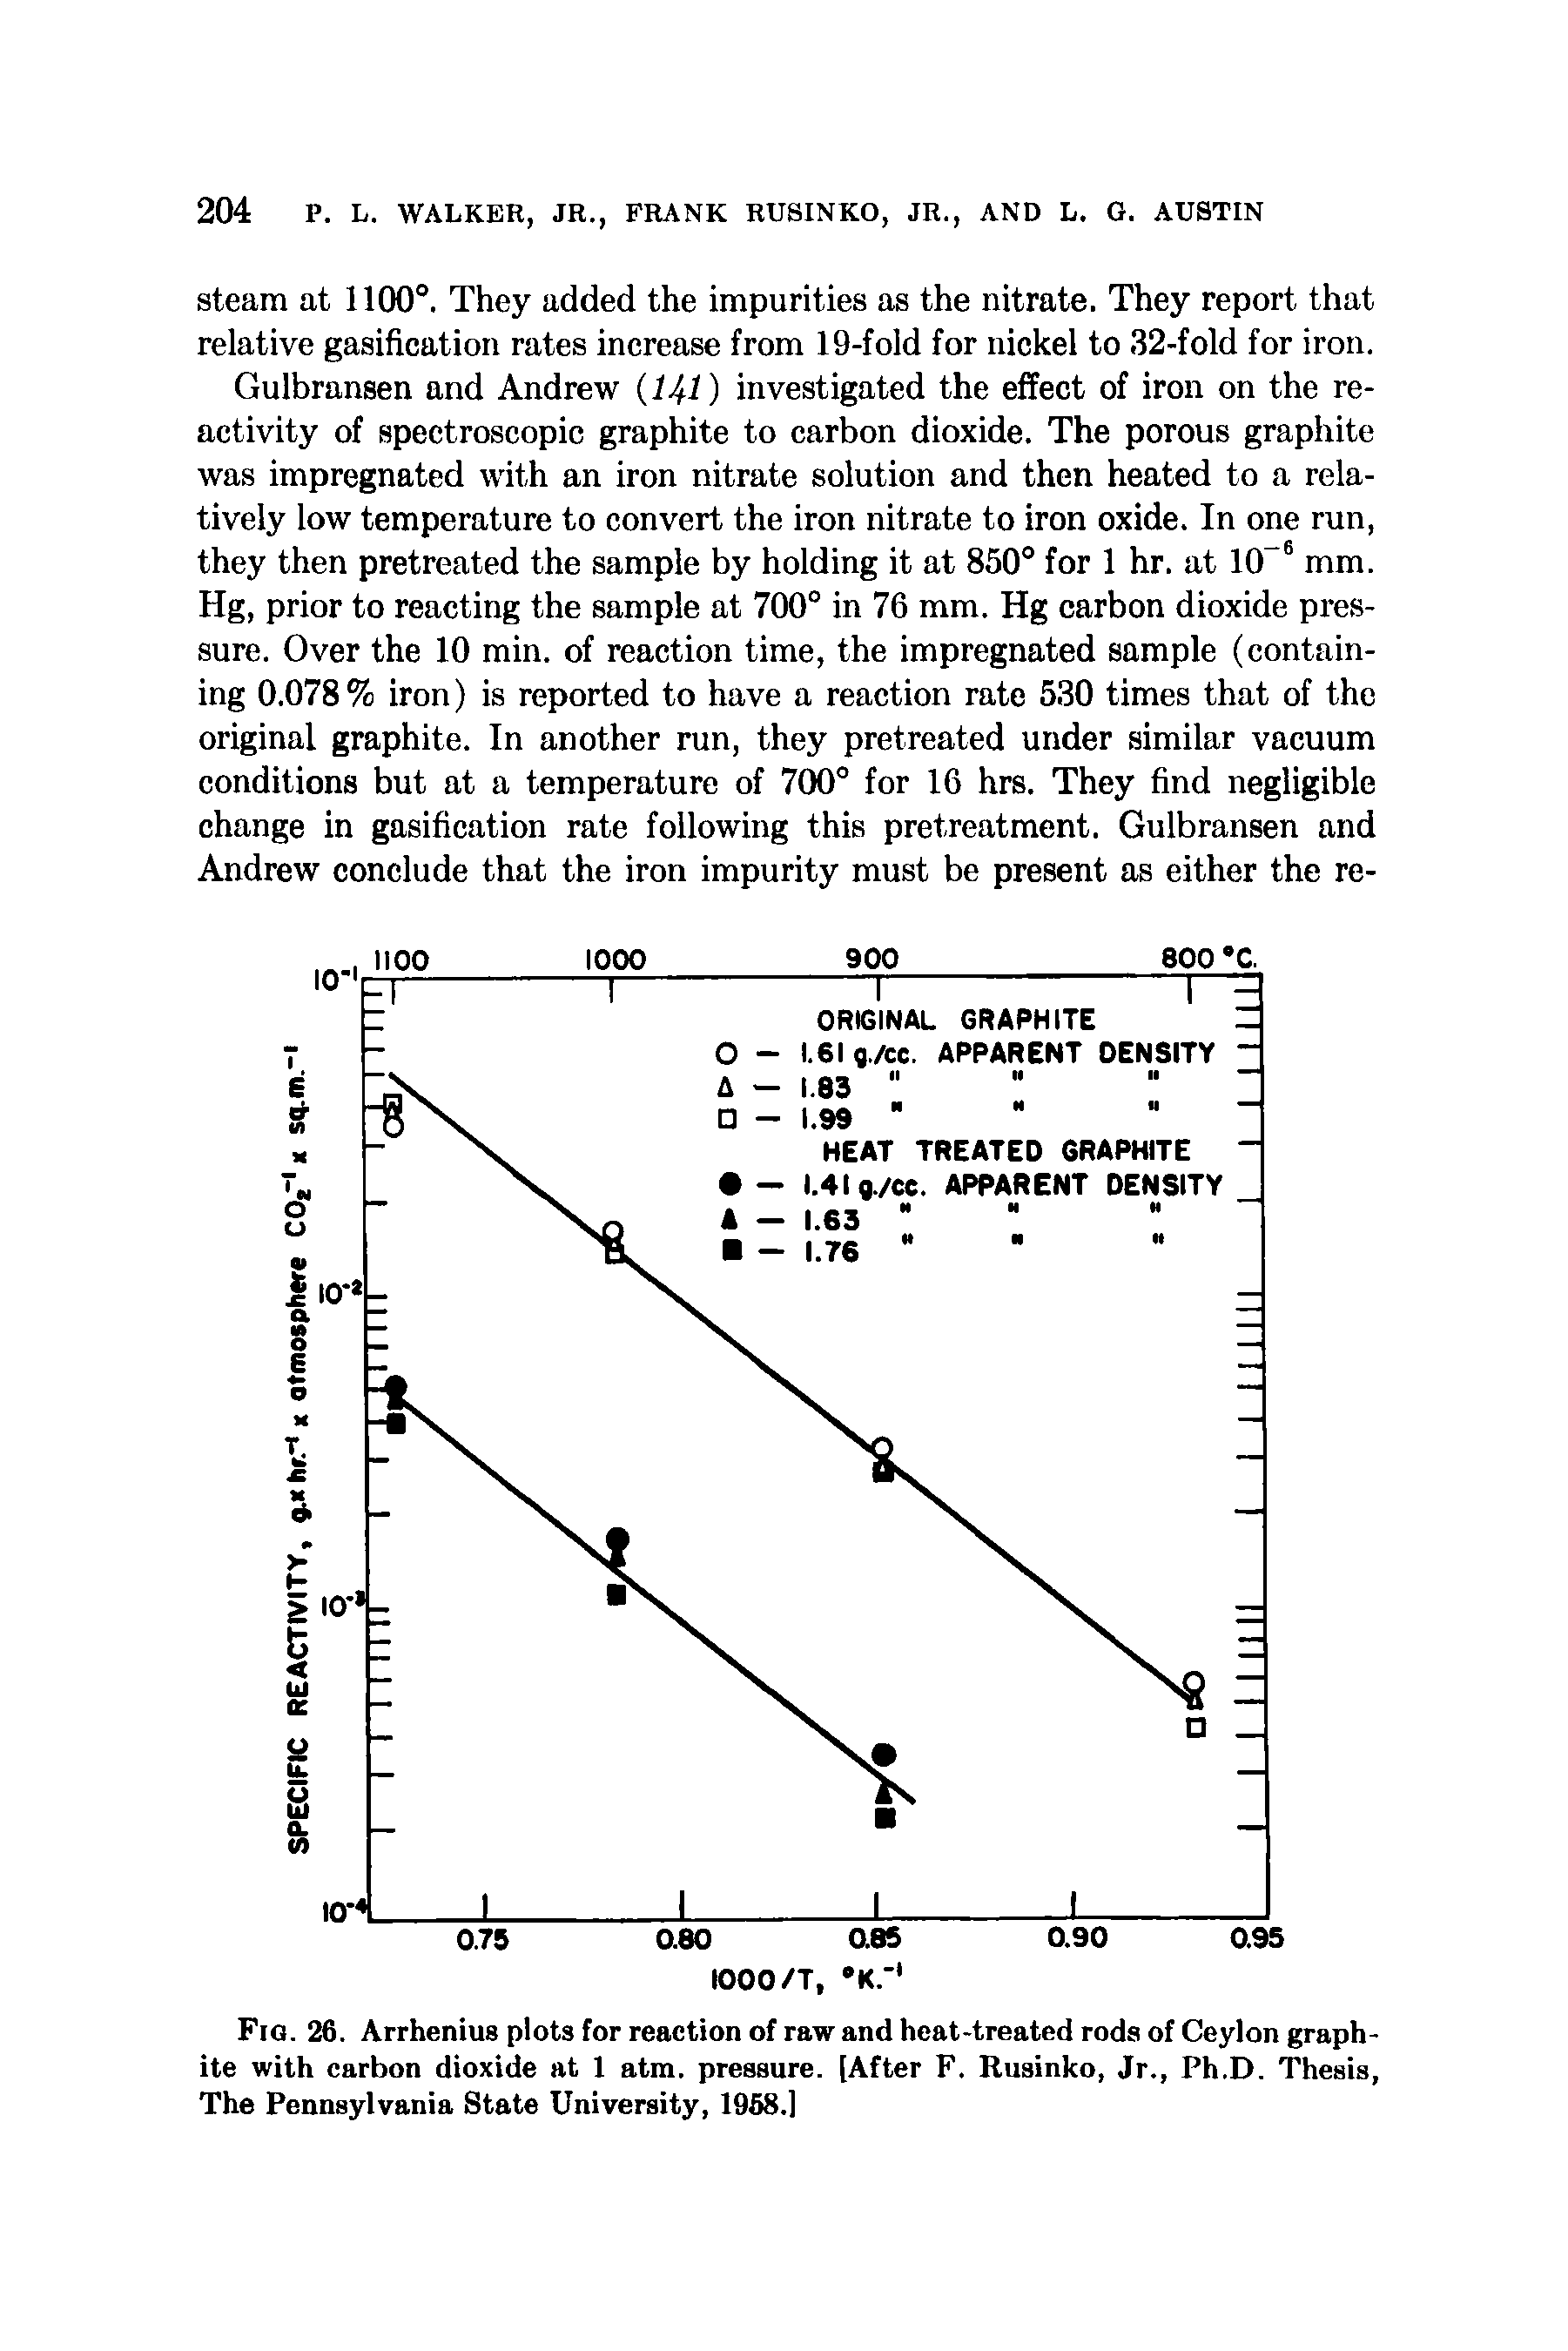 Fig. 26. Arrhenius plots for reaction of raw and heat-treated rods of Ceylon graphite with carbon dioxide at 1 atm. pressure. [After F. Rusinko, Jr., Ph.D. Thesis, The Pennsylvania State University, 1968.1...